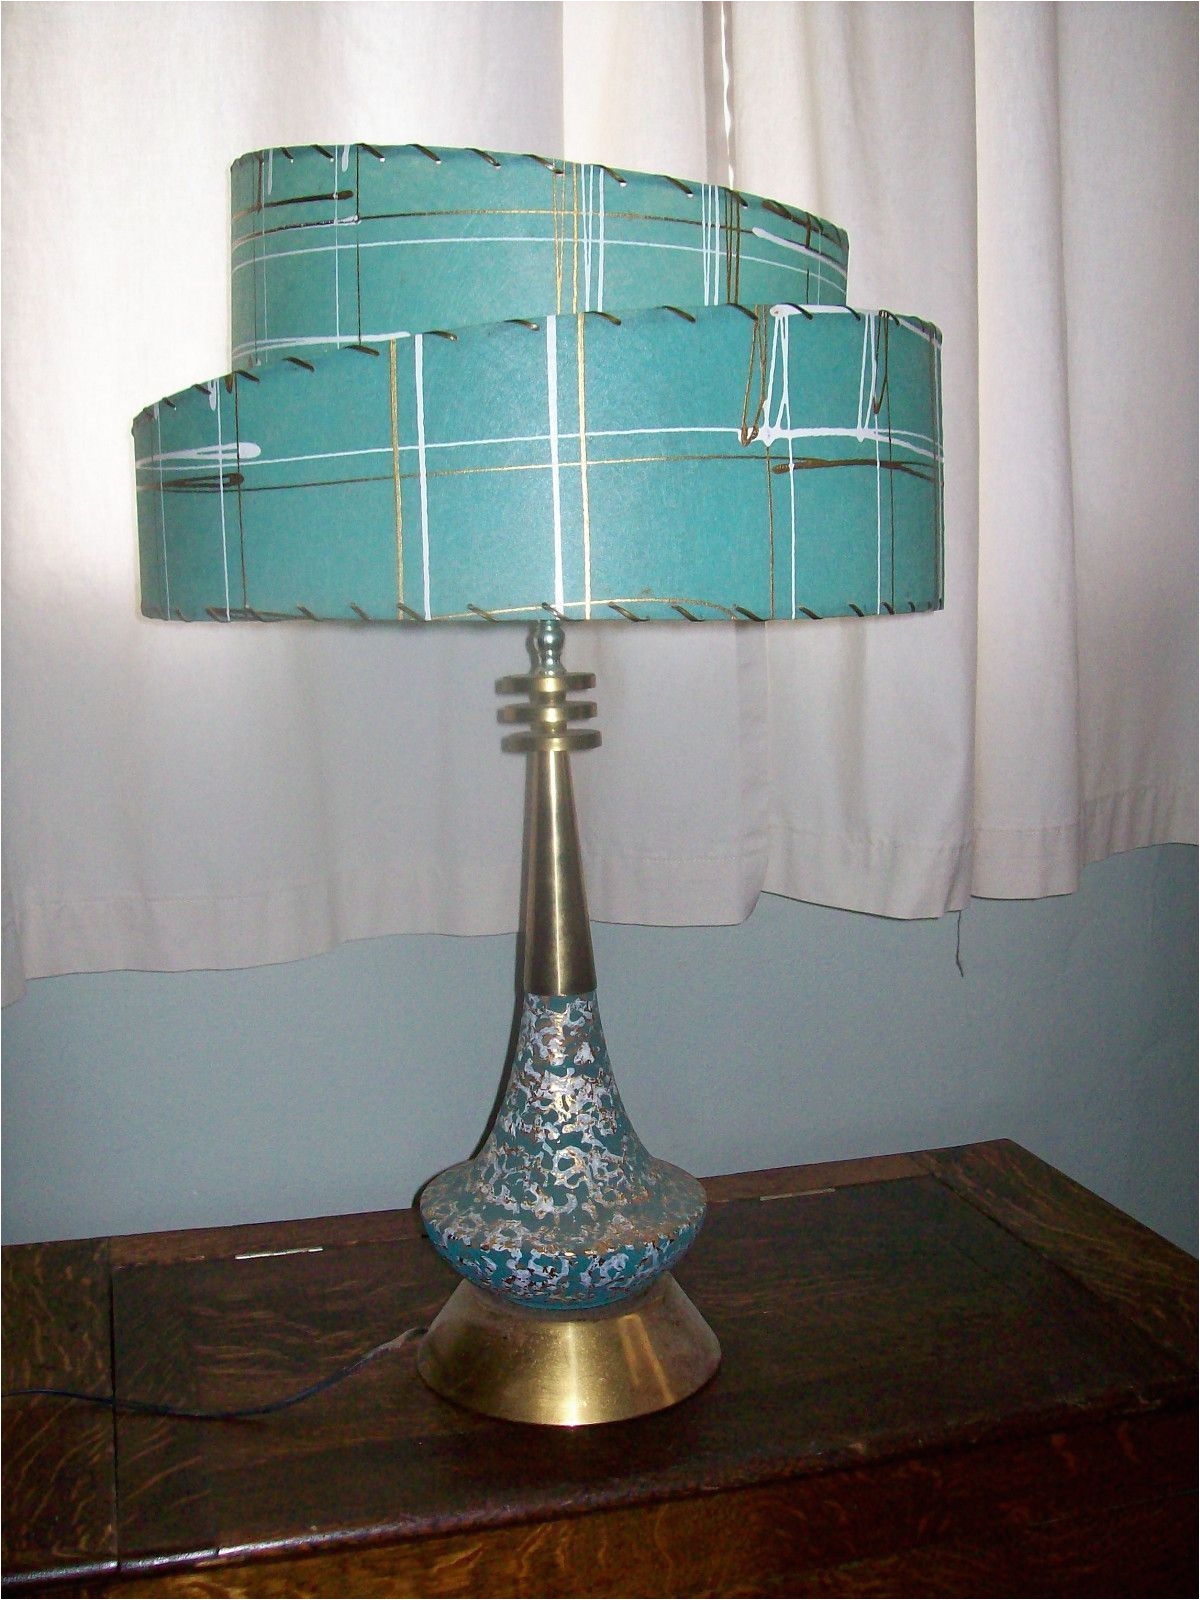 what a glorious teal gold and white mid century modern lamp with matching two tier fiberglass lampshade